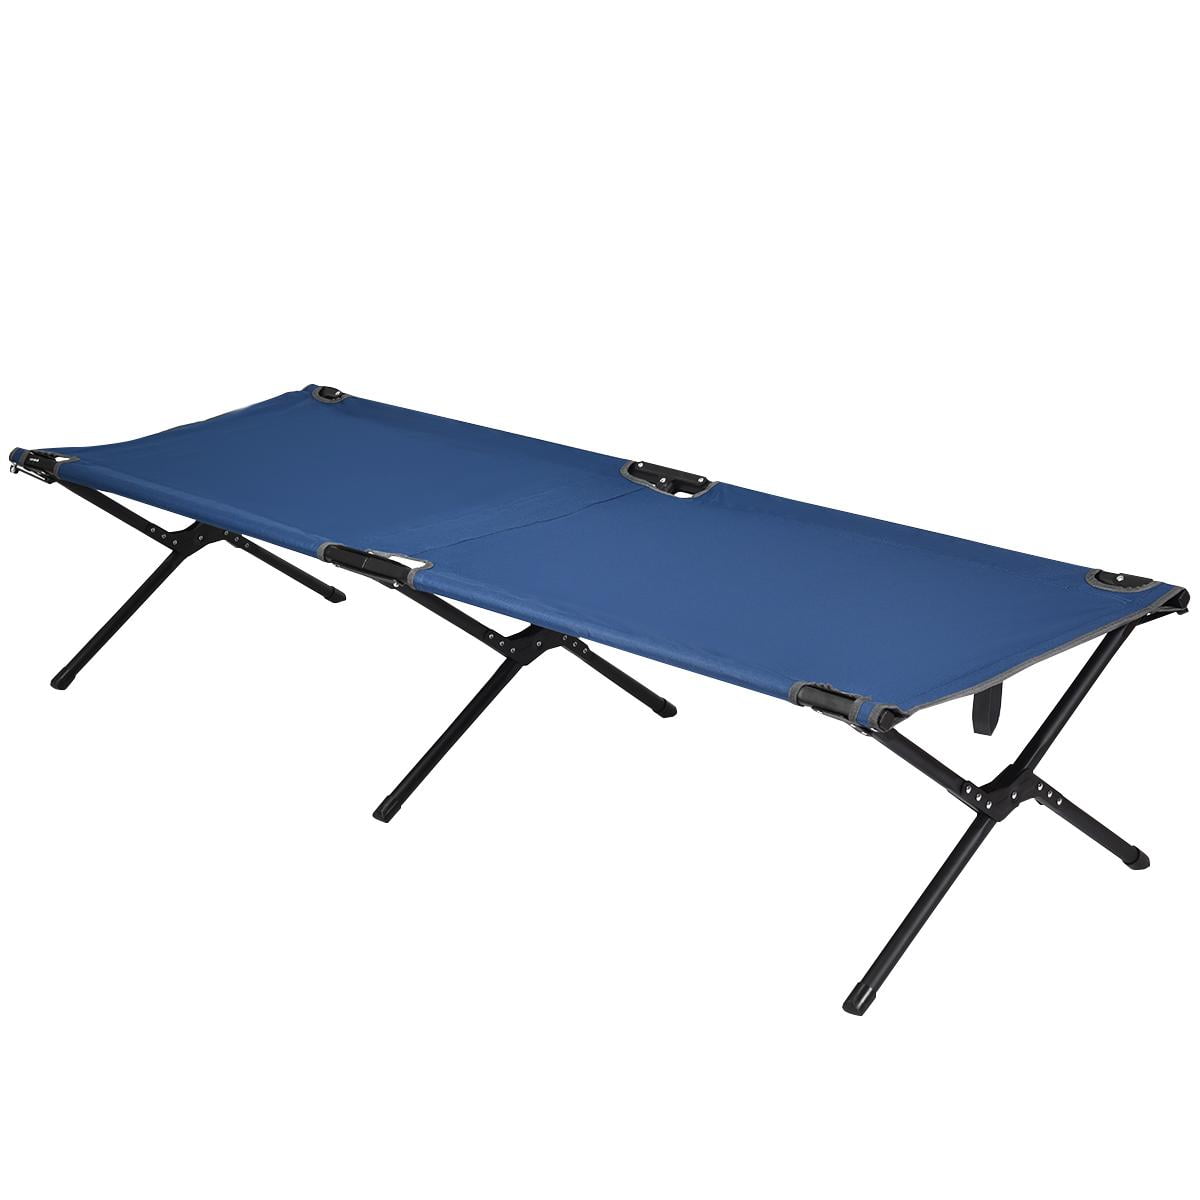 Details about   28"W Military Cot Fold Up 1200D Camping folding Bed Hiking Travel w/Carry Bag 